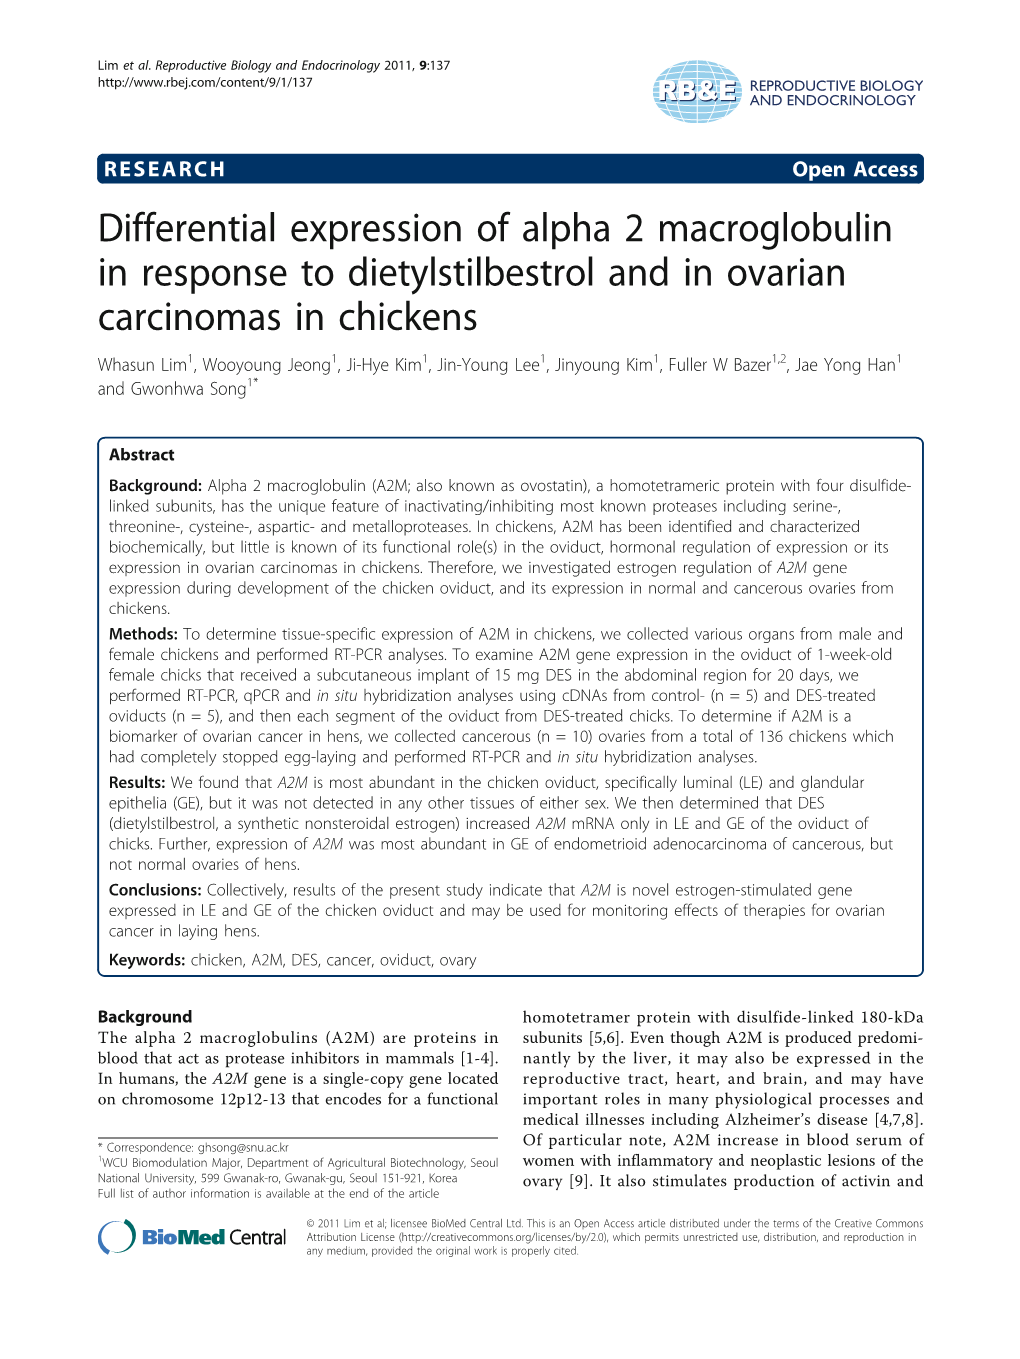 Differential Expression of Alpha 2 Macroglobulin in Response To